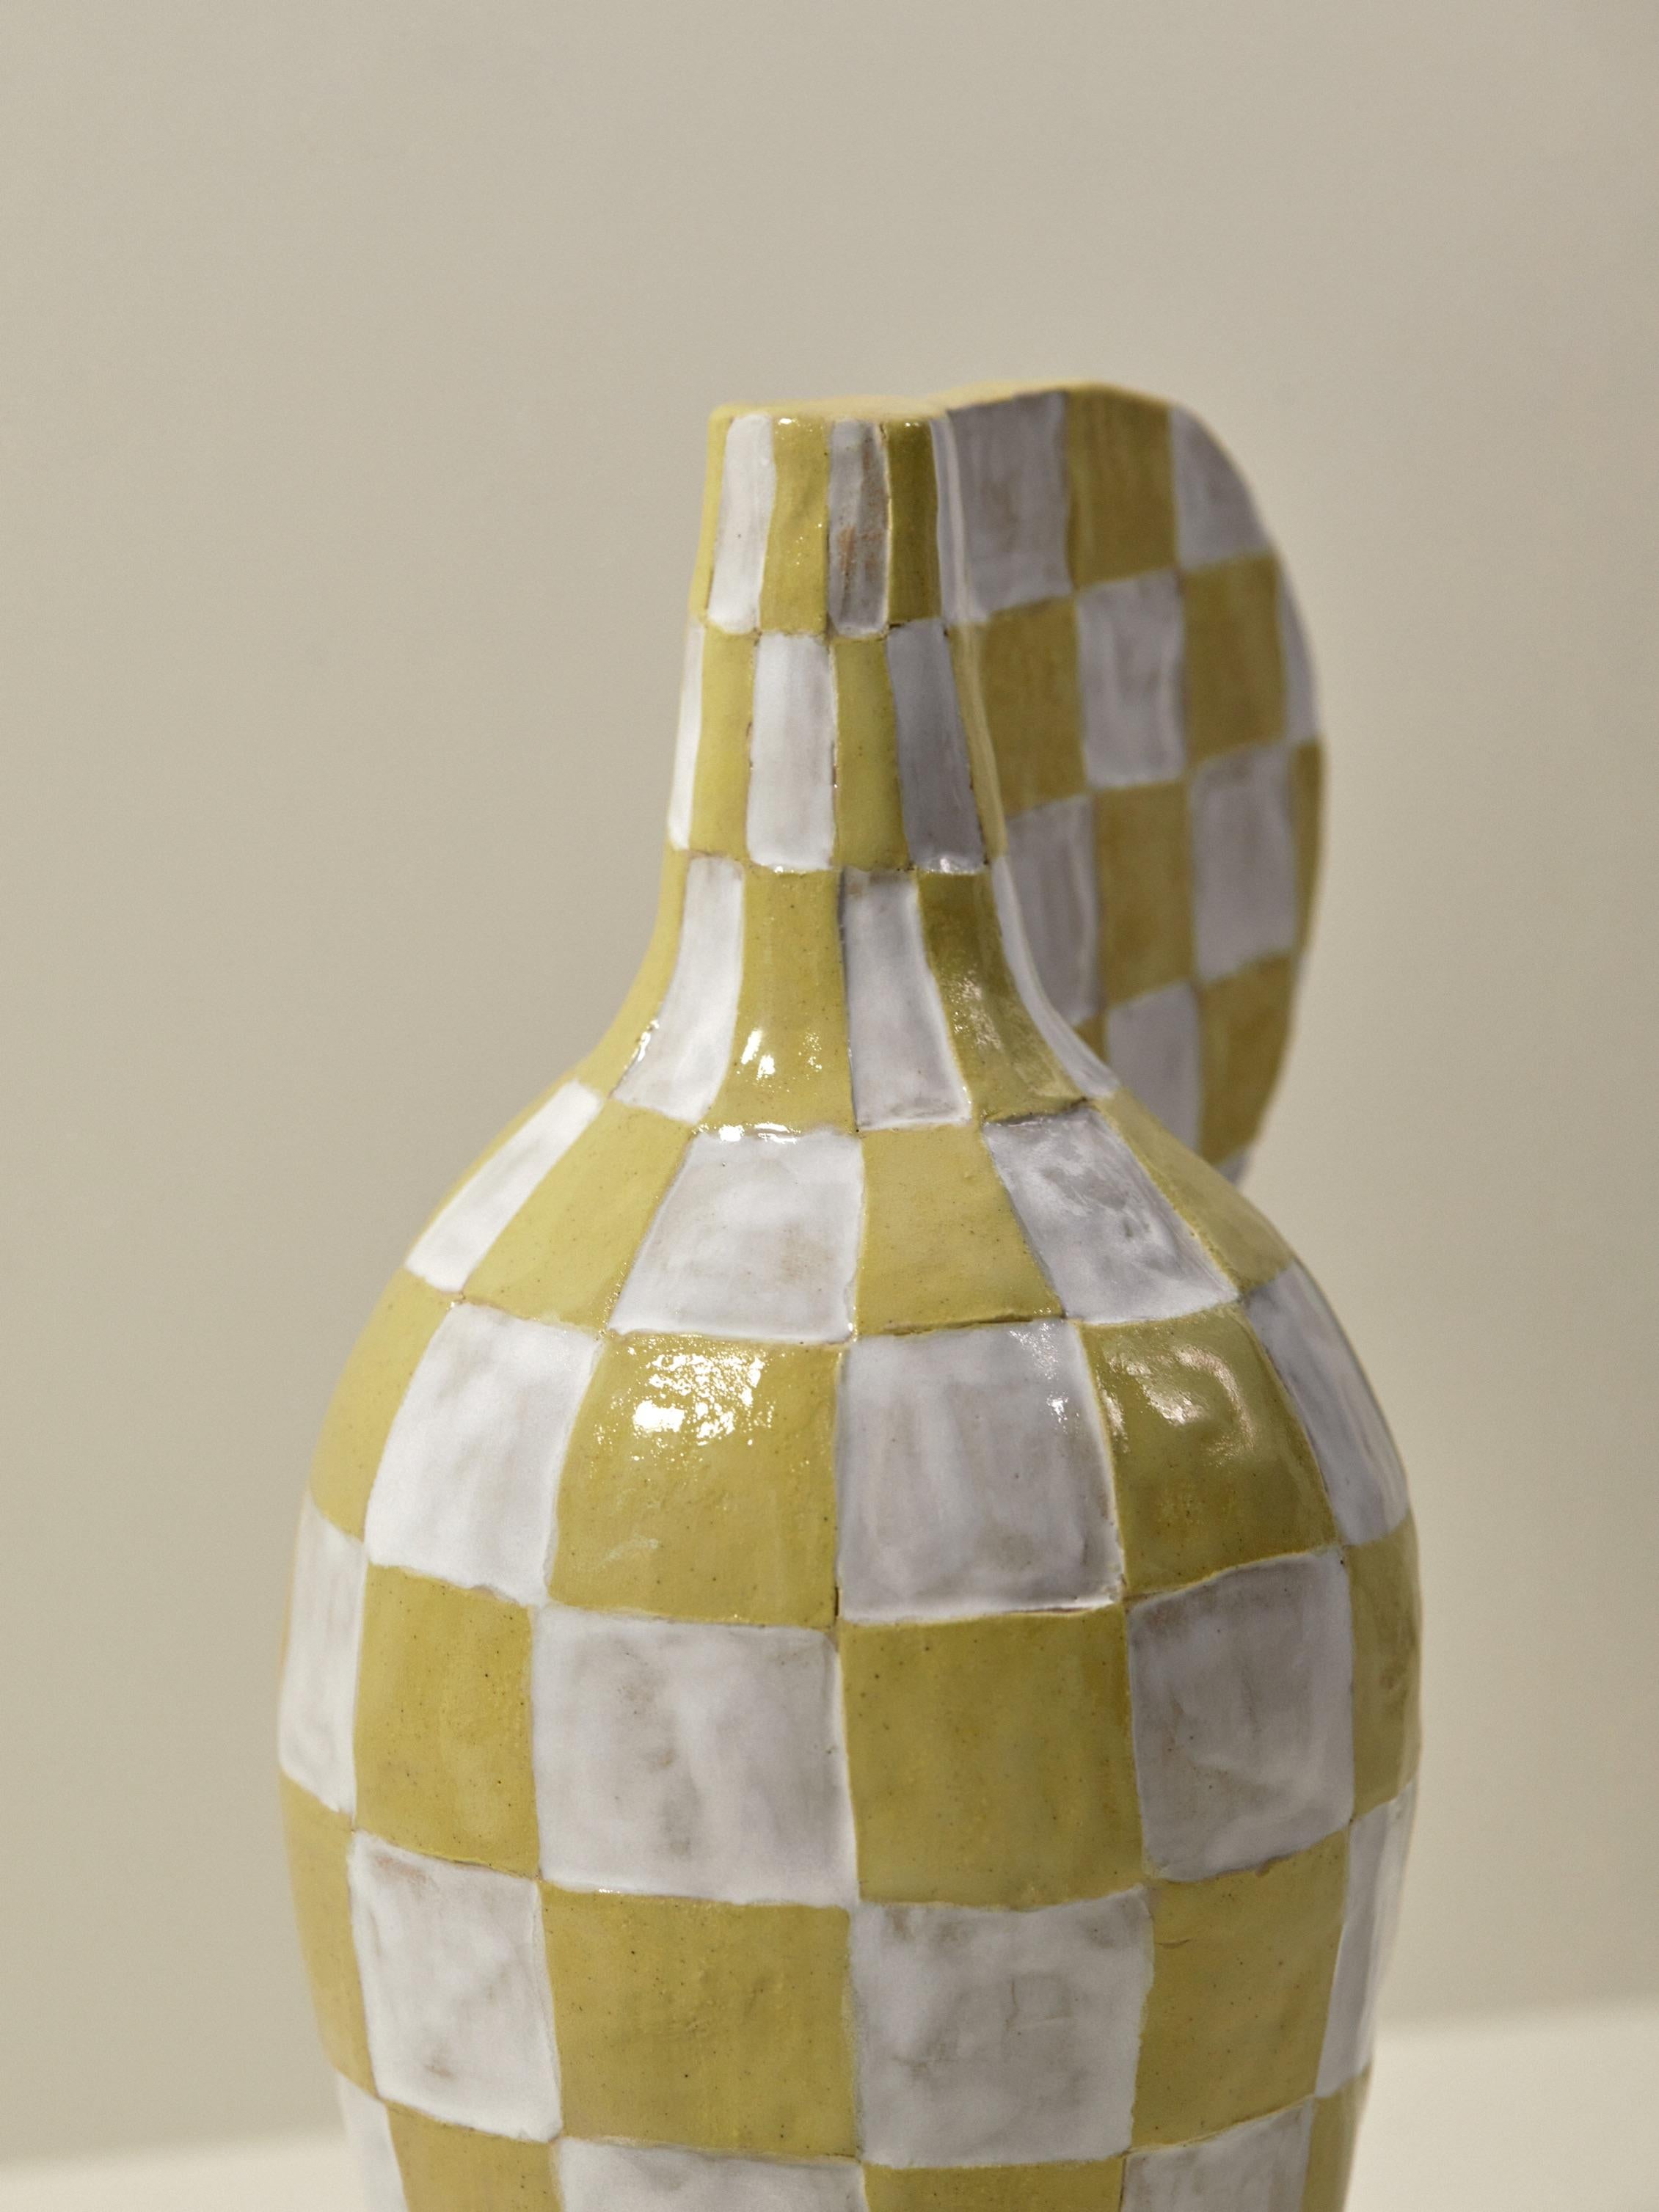 This piece is a playful handmade ceramic sculptural vase created by the Danish artist Maria Lenskjold for the series ‘Potion Bottles’. Like many of her works, upon closer inspection the piece is merely an abstraction —even a caricature of a vase—as